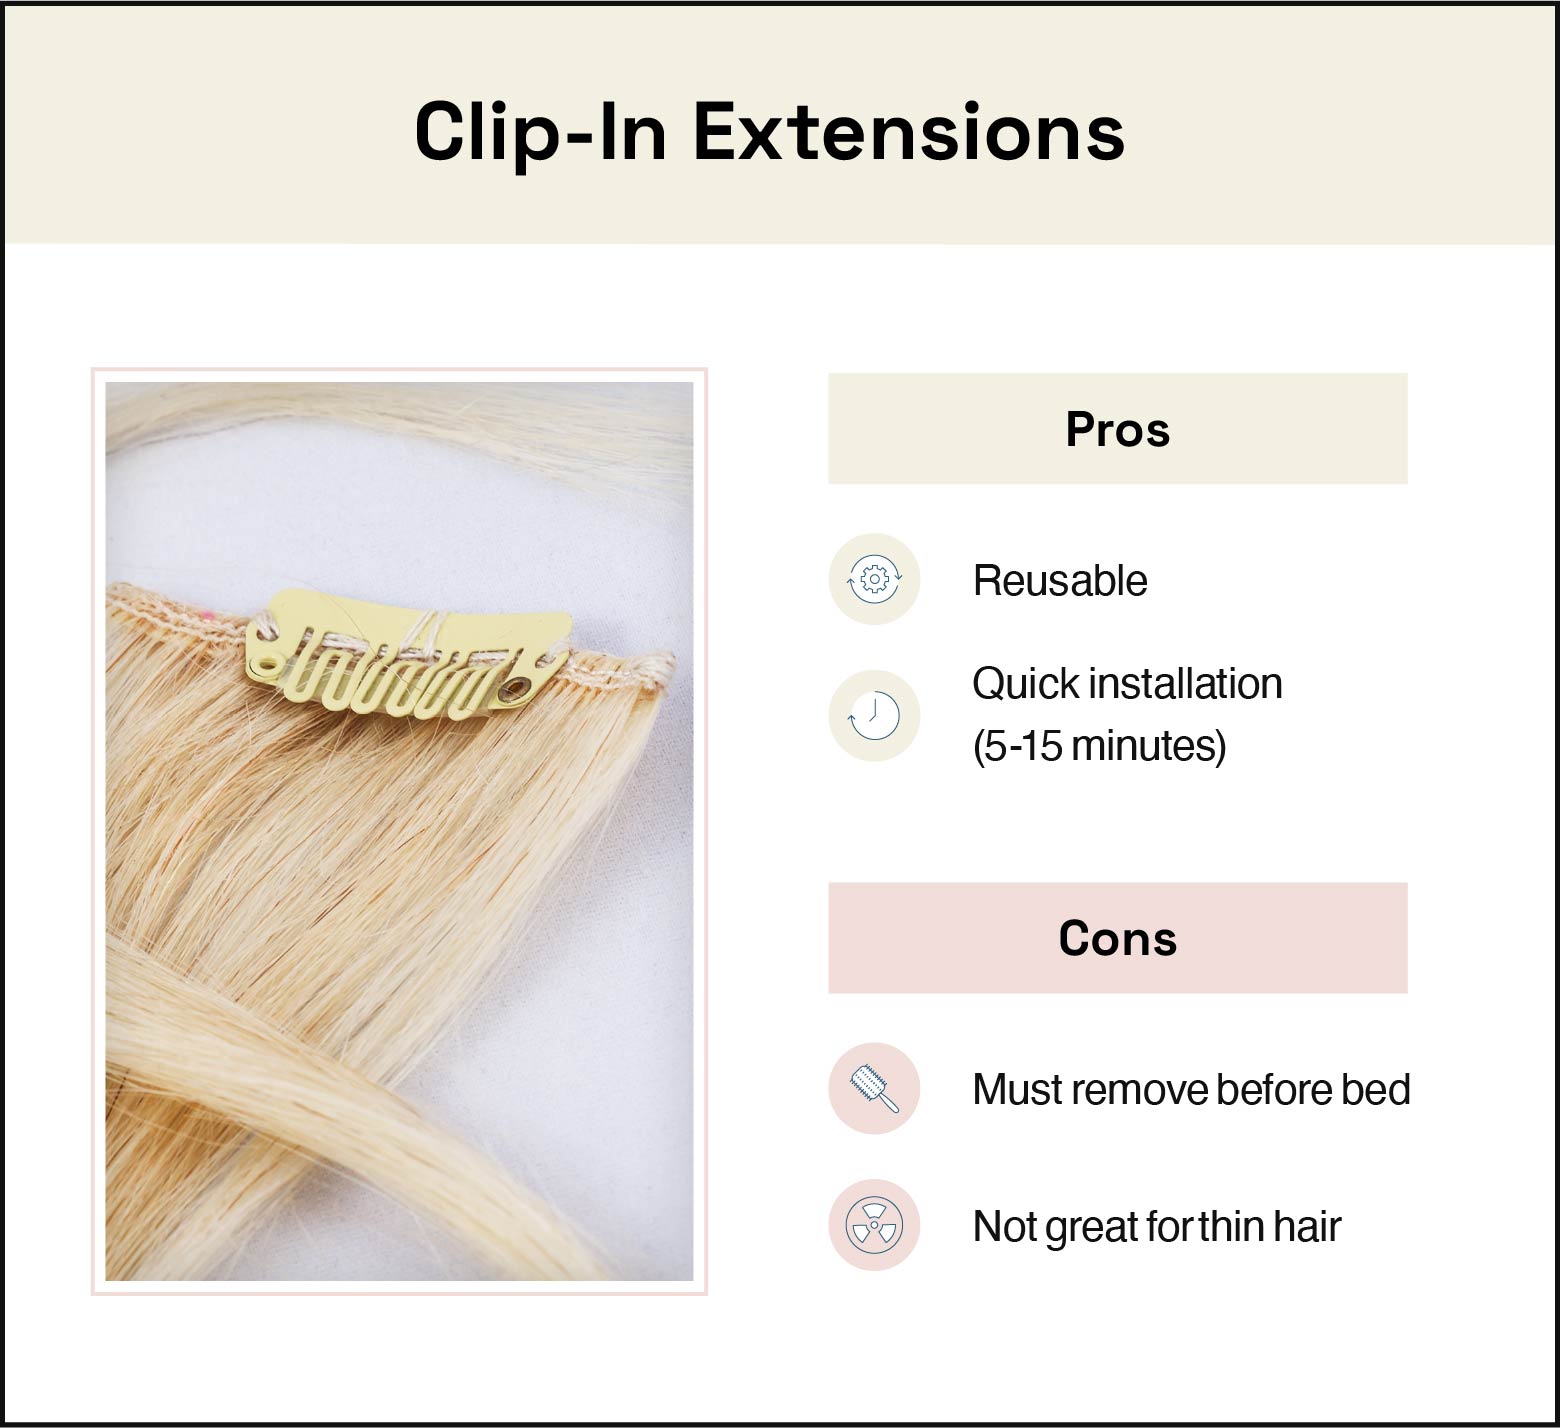 photo of blonde clip-in extensions on the left and list of pros and cons on the right